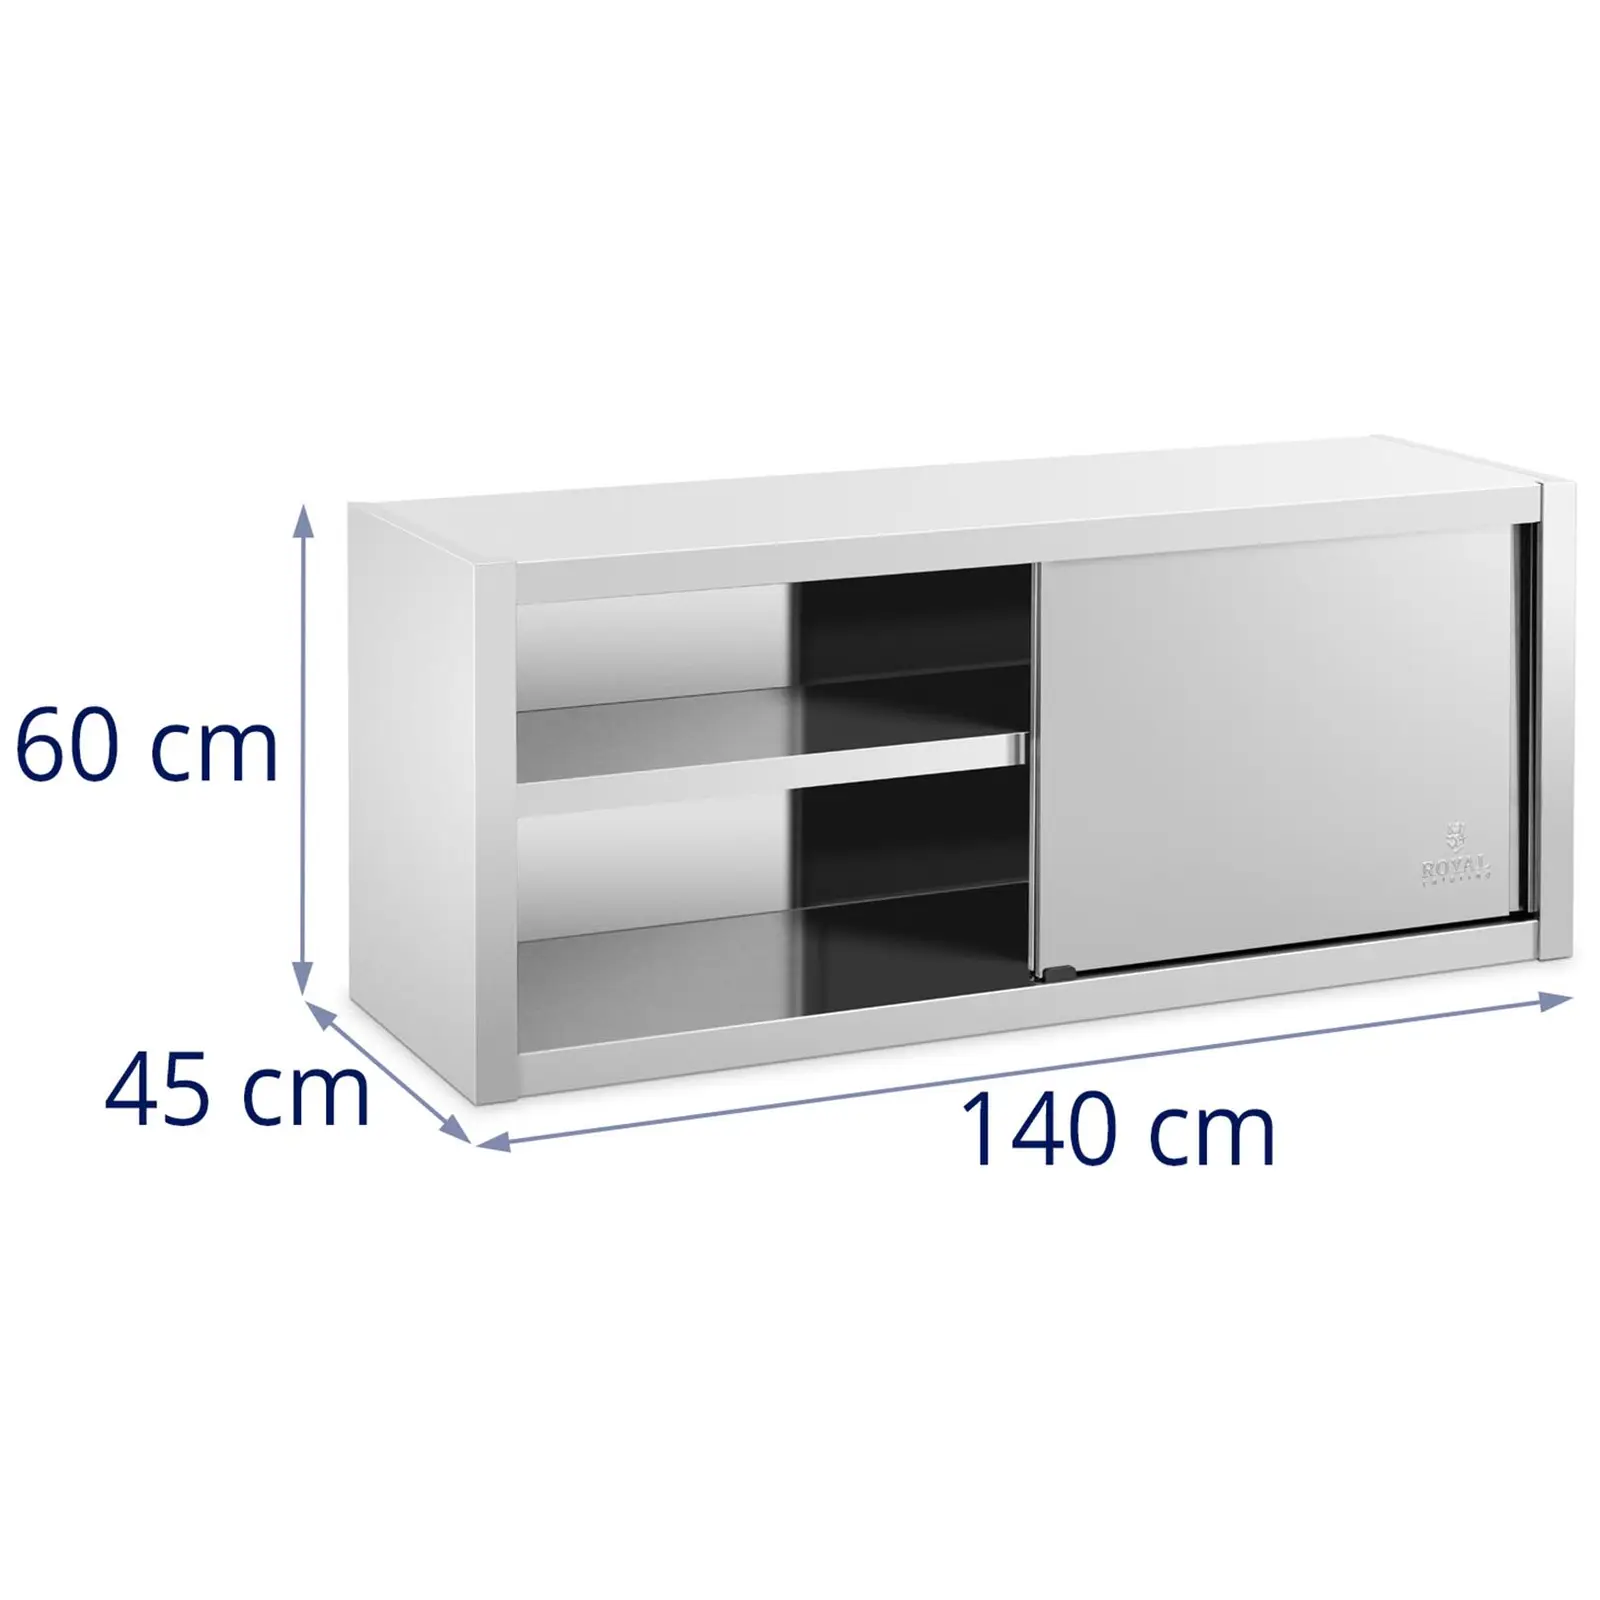 Stainless Steel Hanging Cabinet - 140 x 45 cm